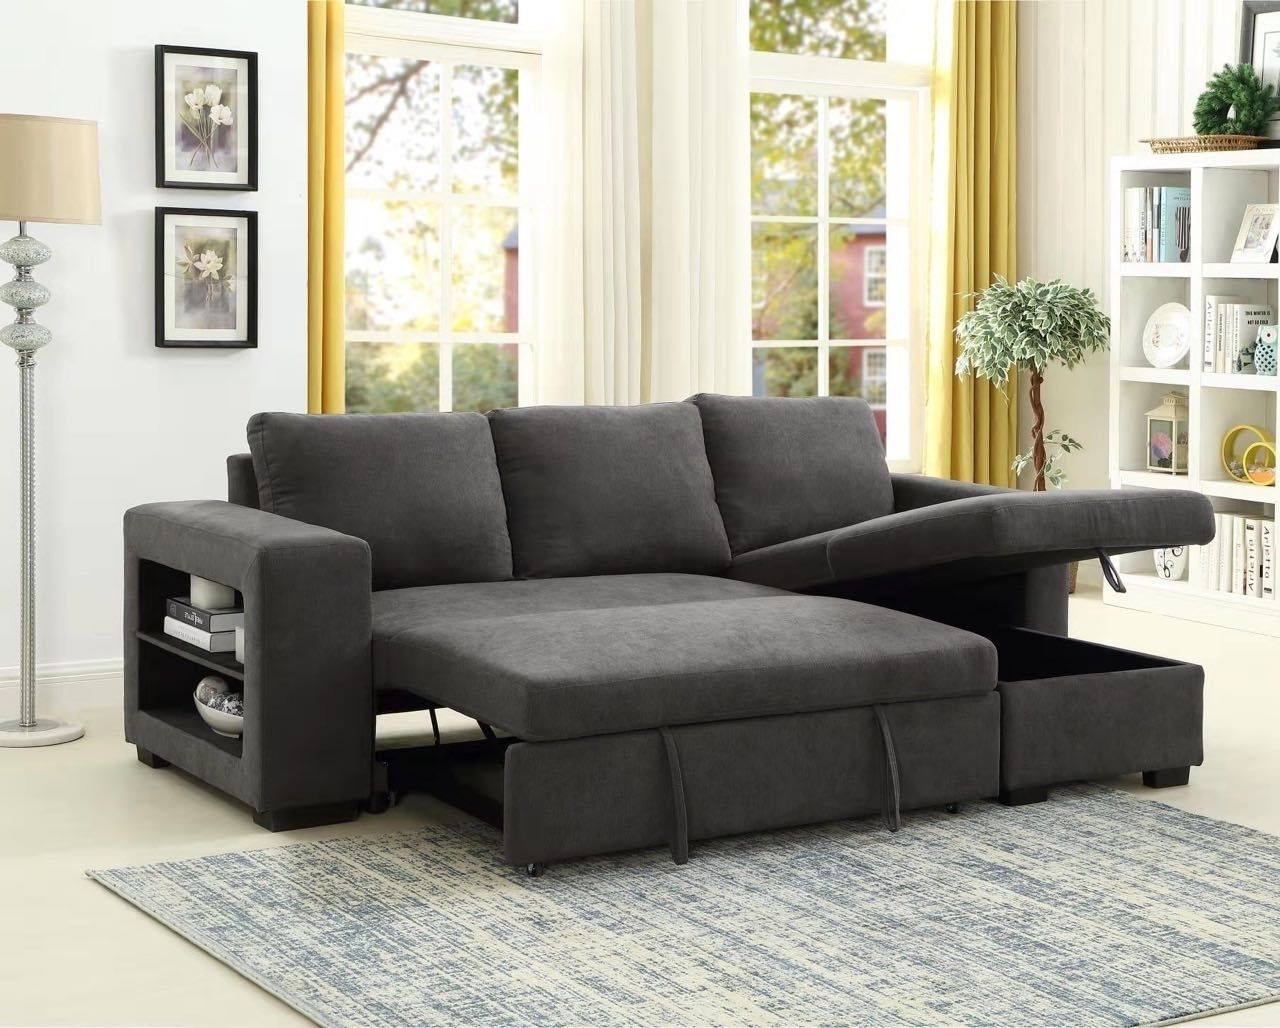 Lucena Reversible Sectional Sofa/Sofa Bed With Storage Within Hartford Storage Sectional Futon Sofas (View 10 of 15)